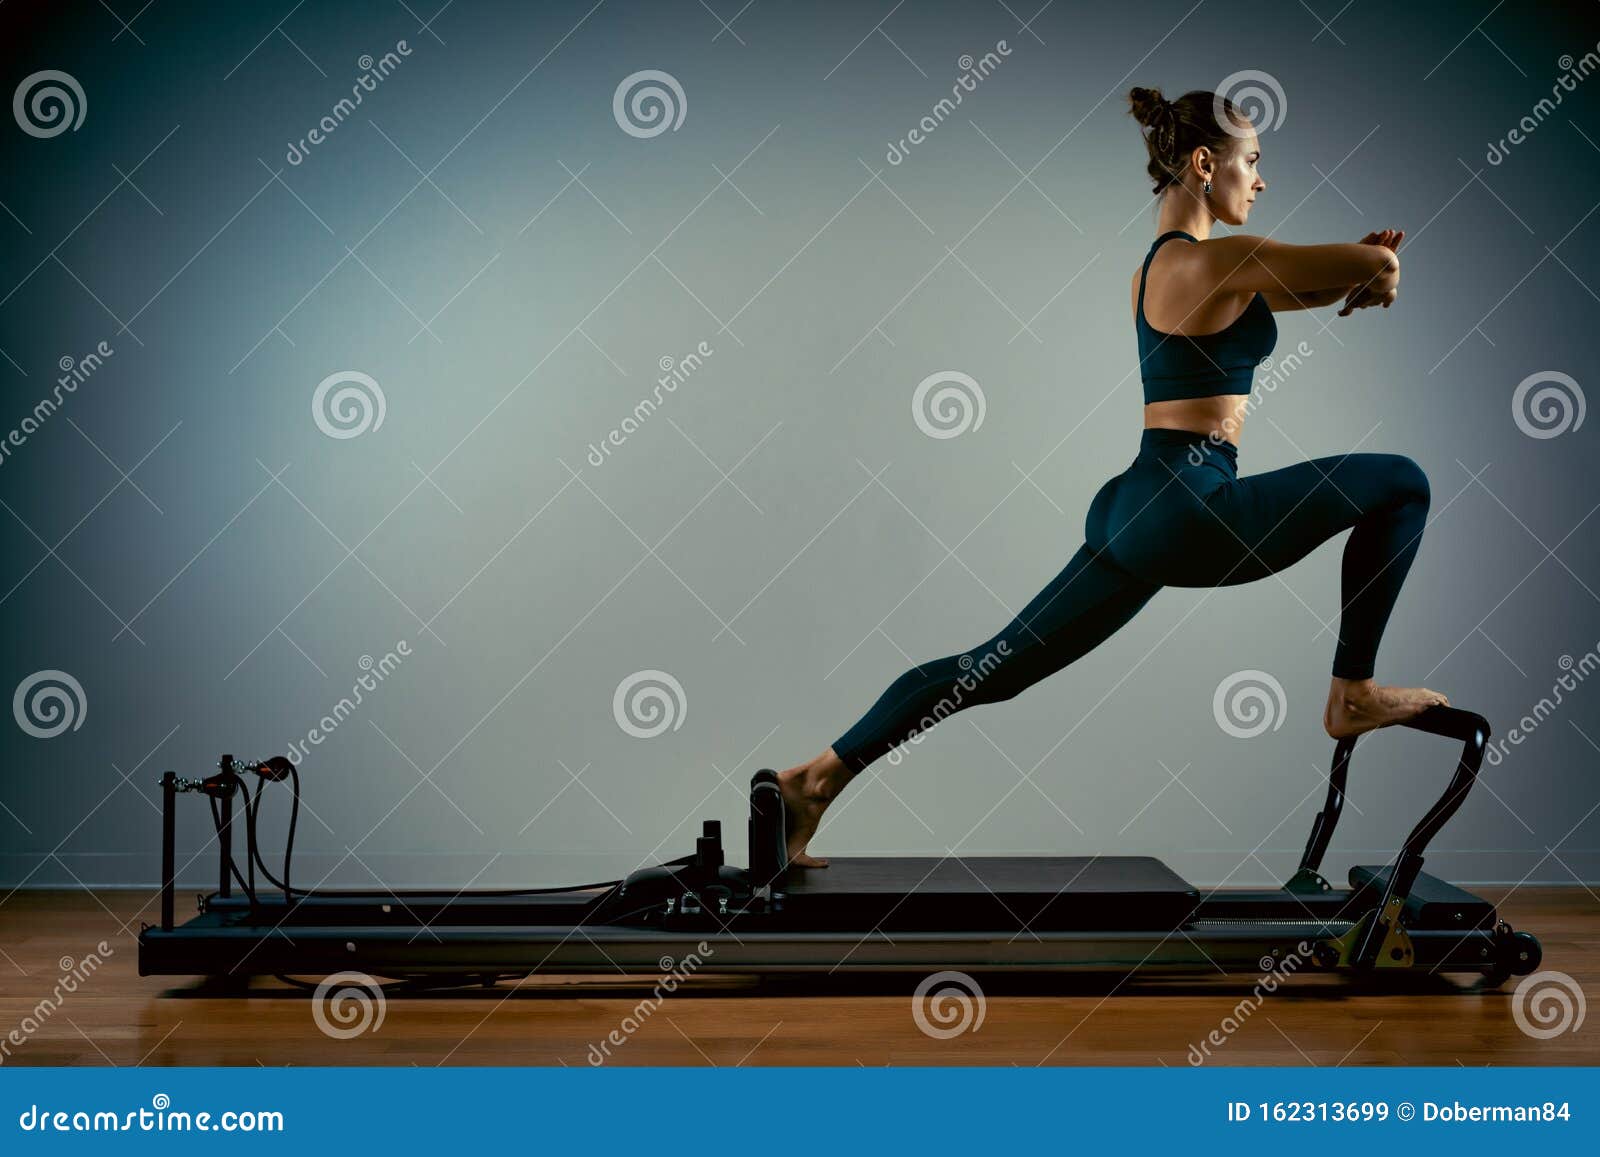 young girl doing pilates exercises with a reformer bed. beautiful slim fitness trainer on a reformer gray background